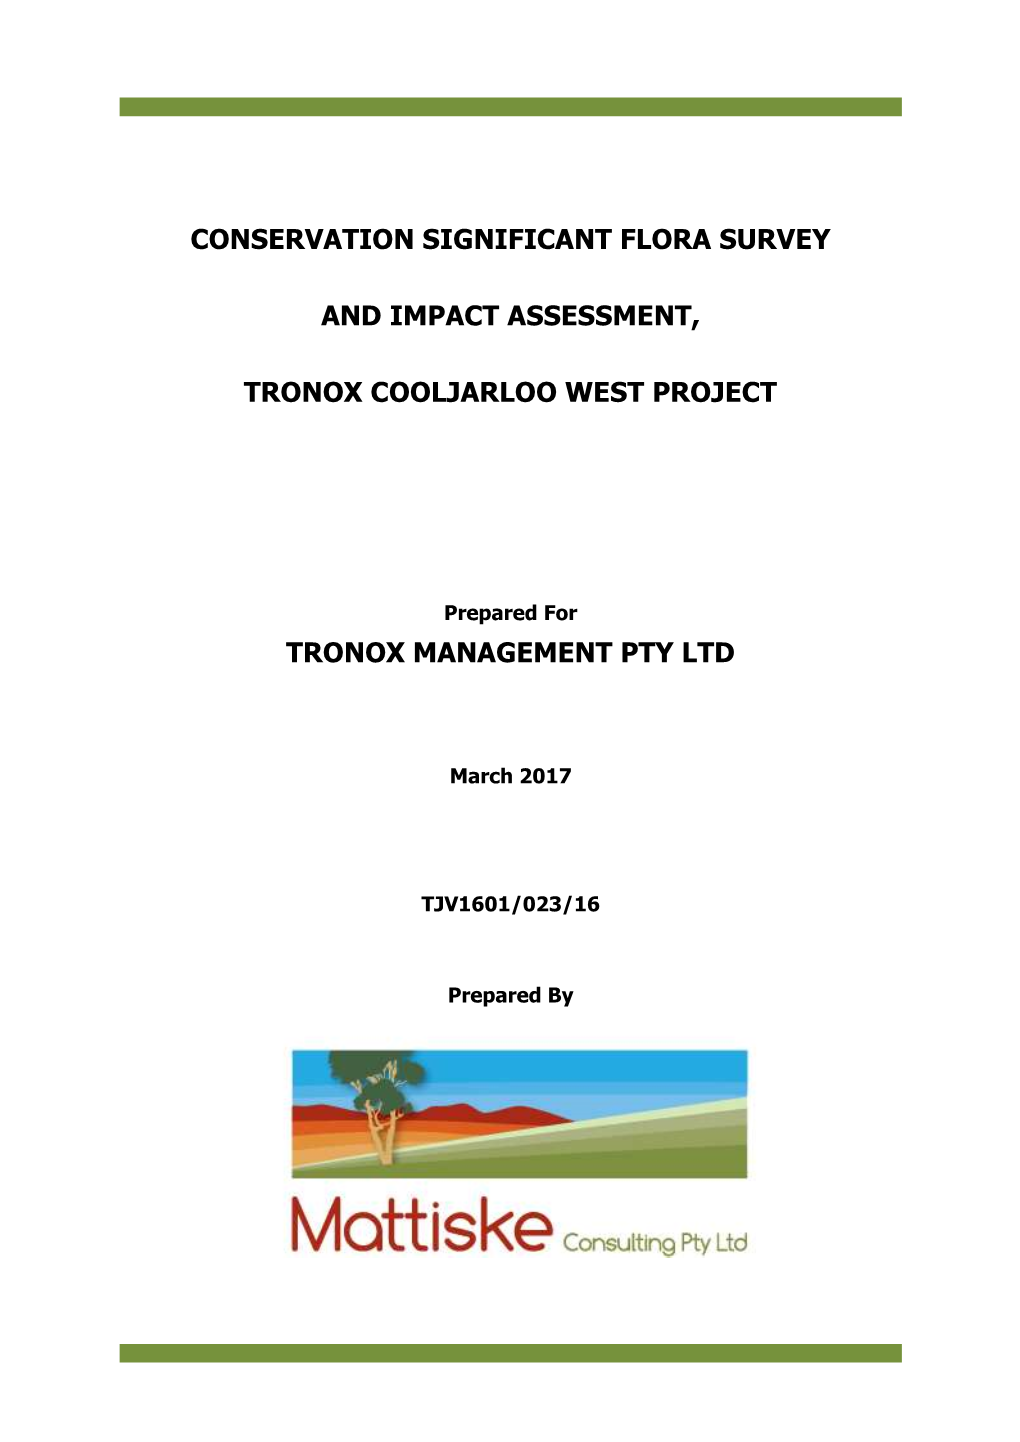 Conservation Significant Flora Survey and Impact Assessment of the Cooljarloo West Project